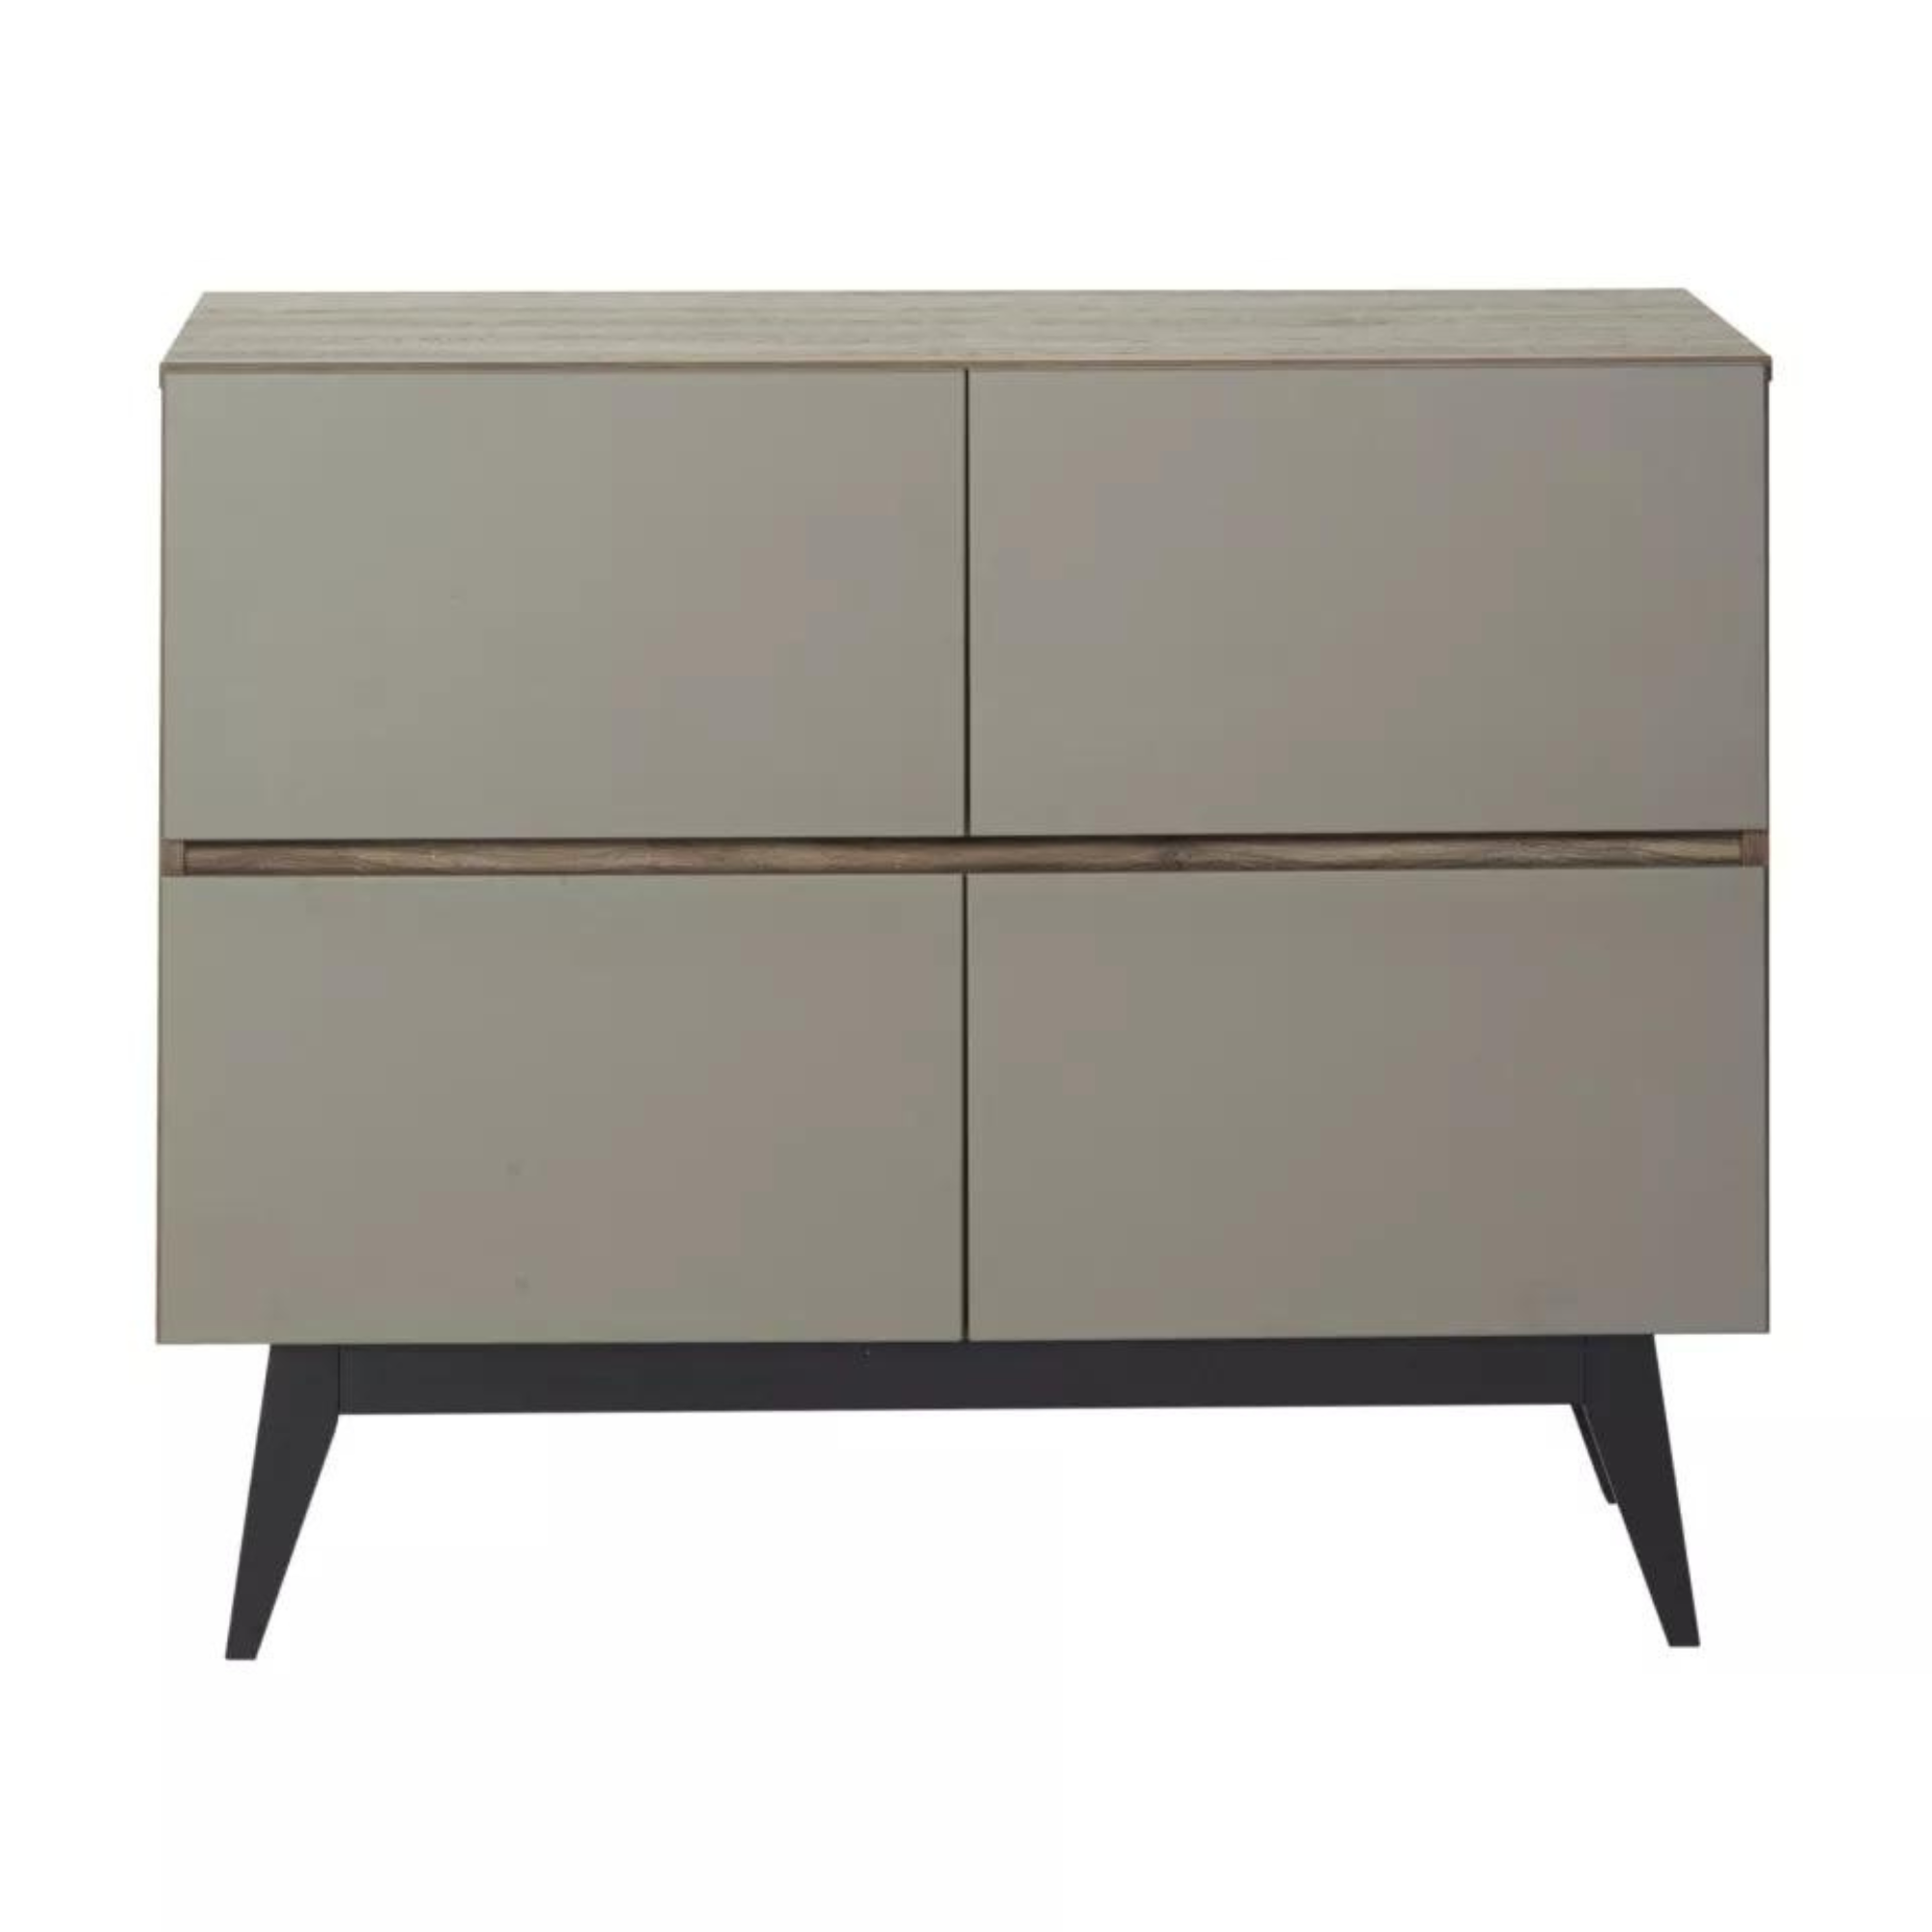 Quax chest of drawers Trendy White